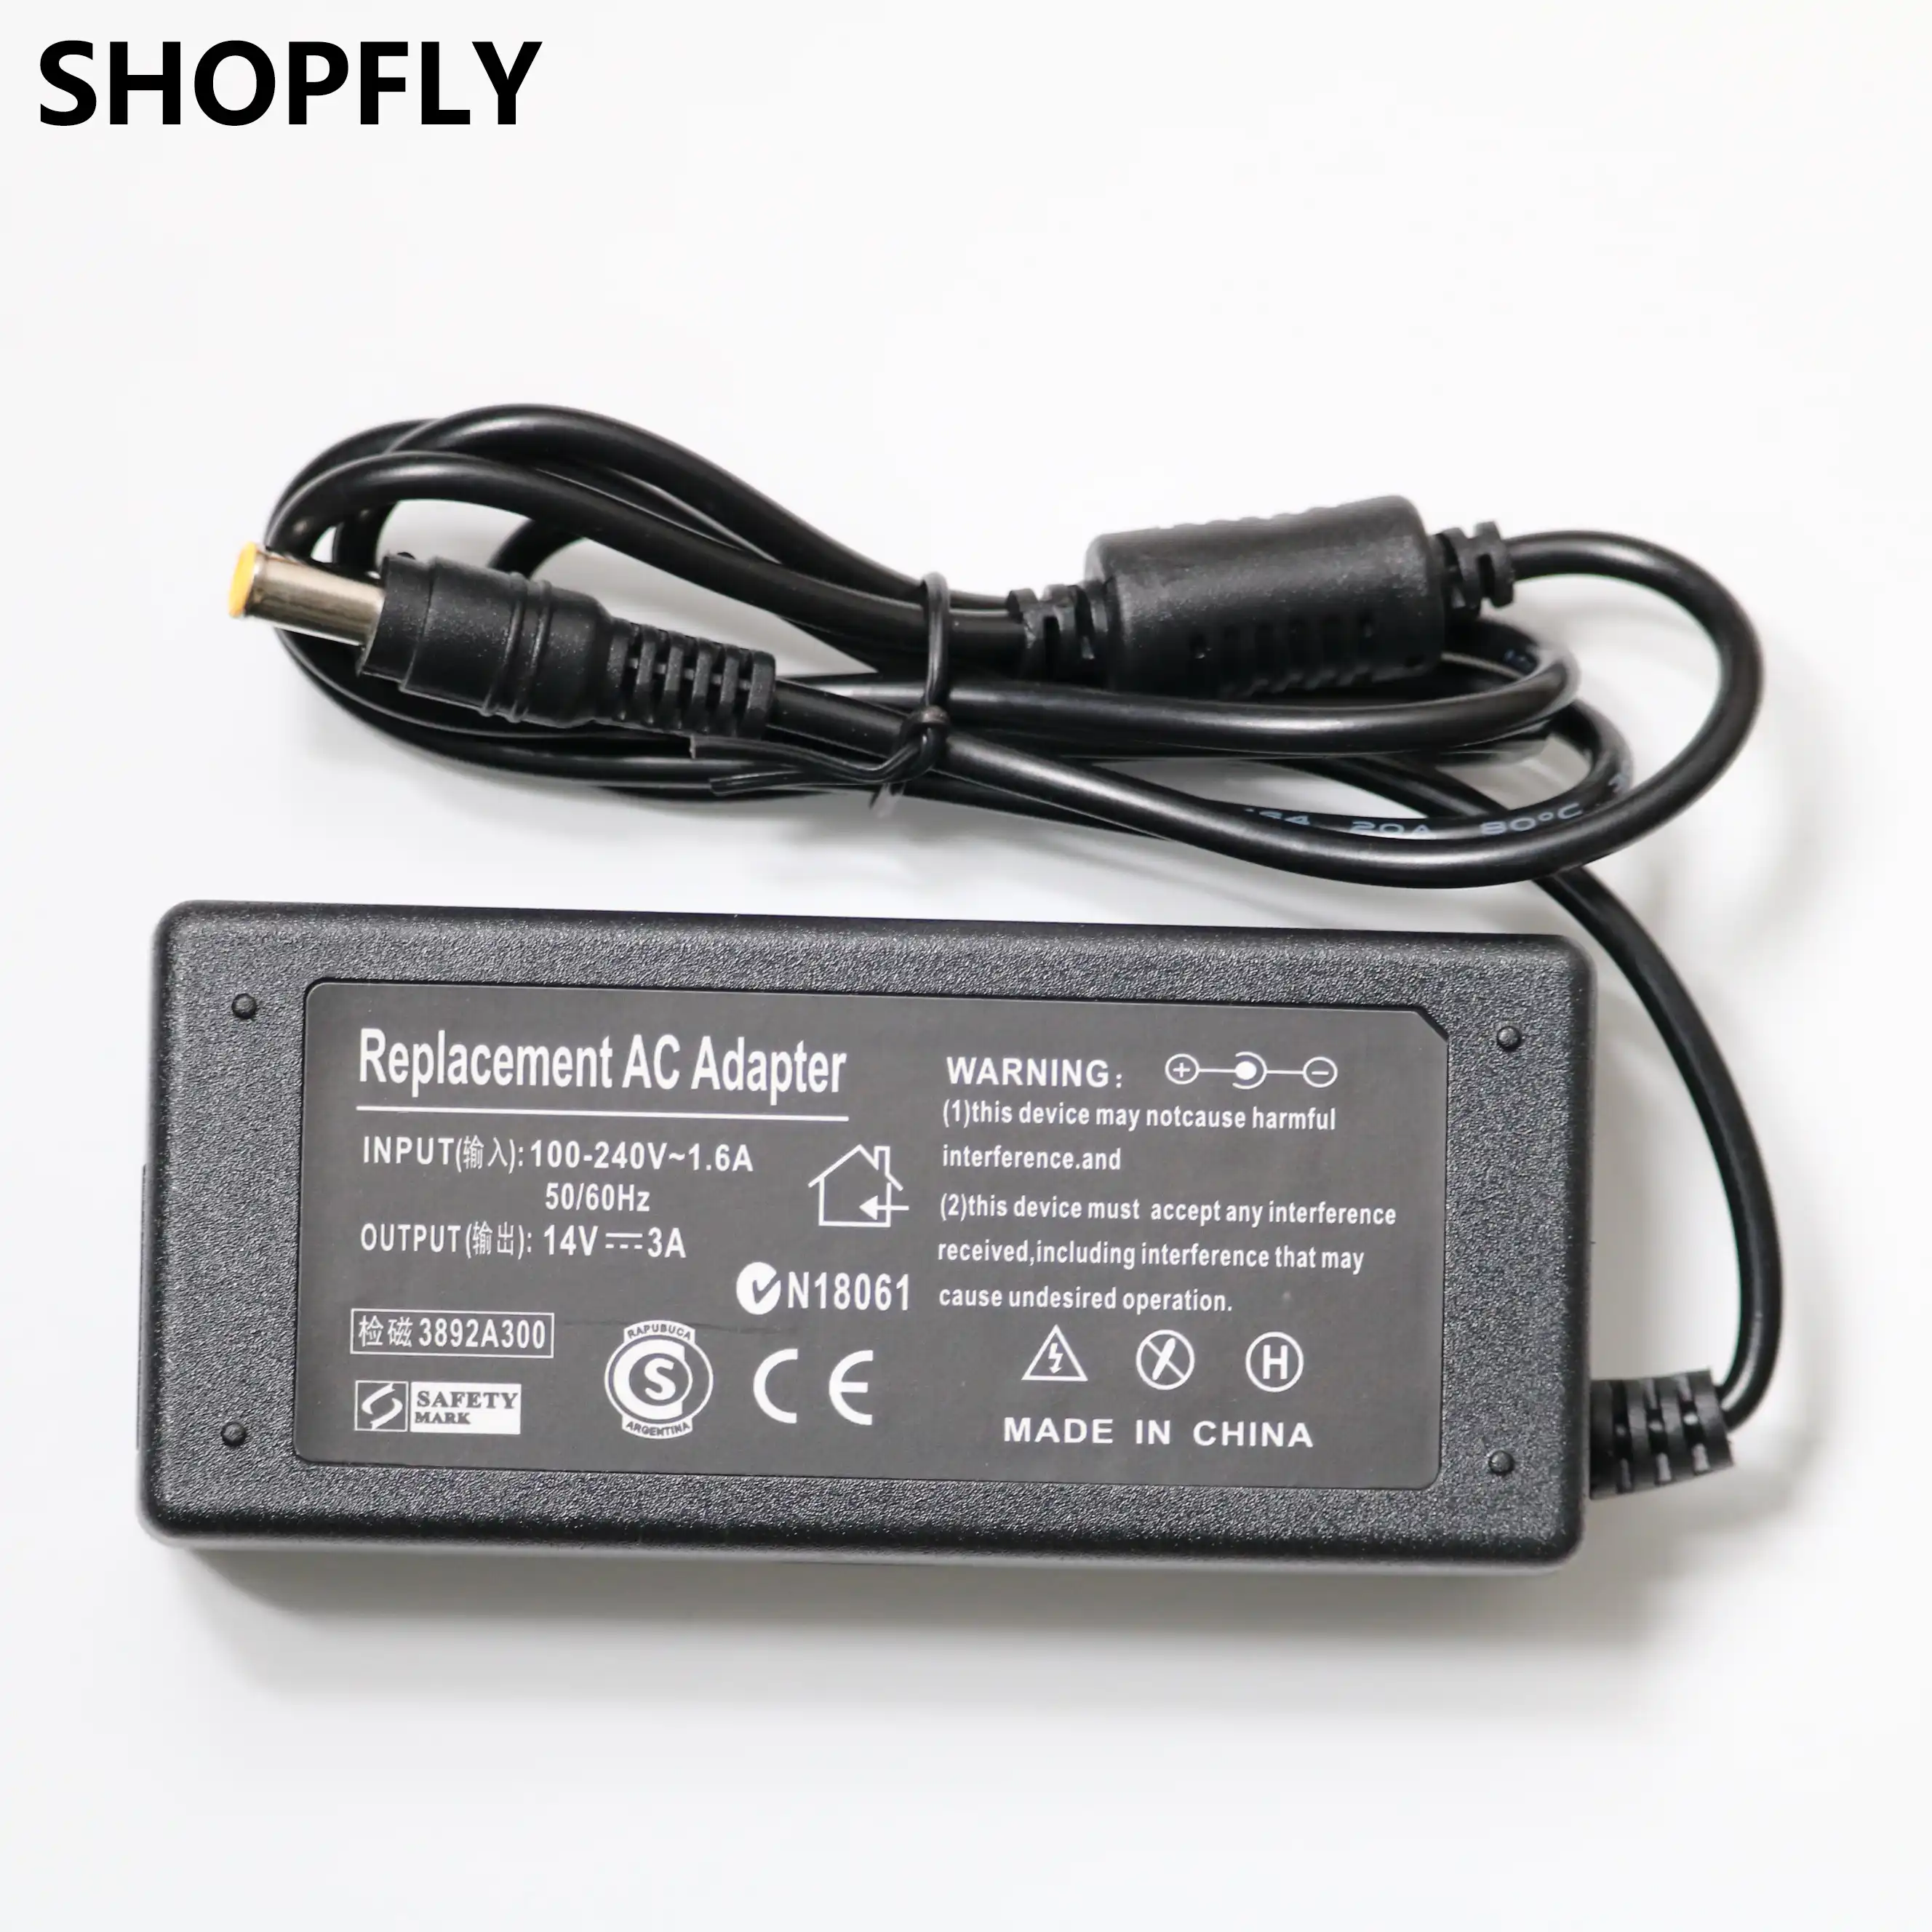 1PCS 14V 3A Adapter For Samsung LCD Monitor BX2235 S22A100N S19A100N  S22A200B S22A300B S23A300B S19A300B S20A300B|Laptop Adapter| - AliExpress